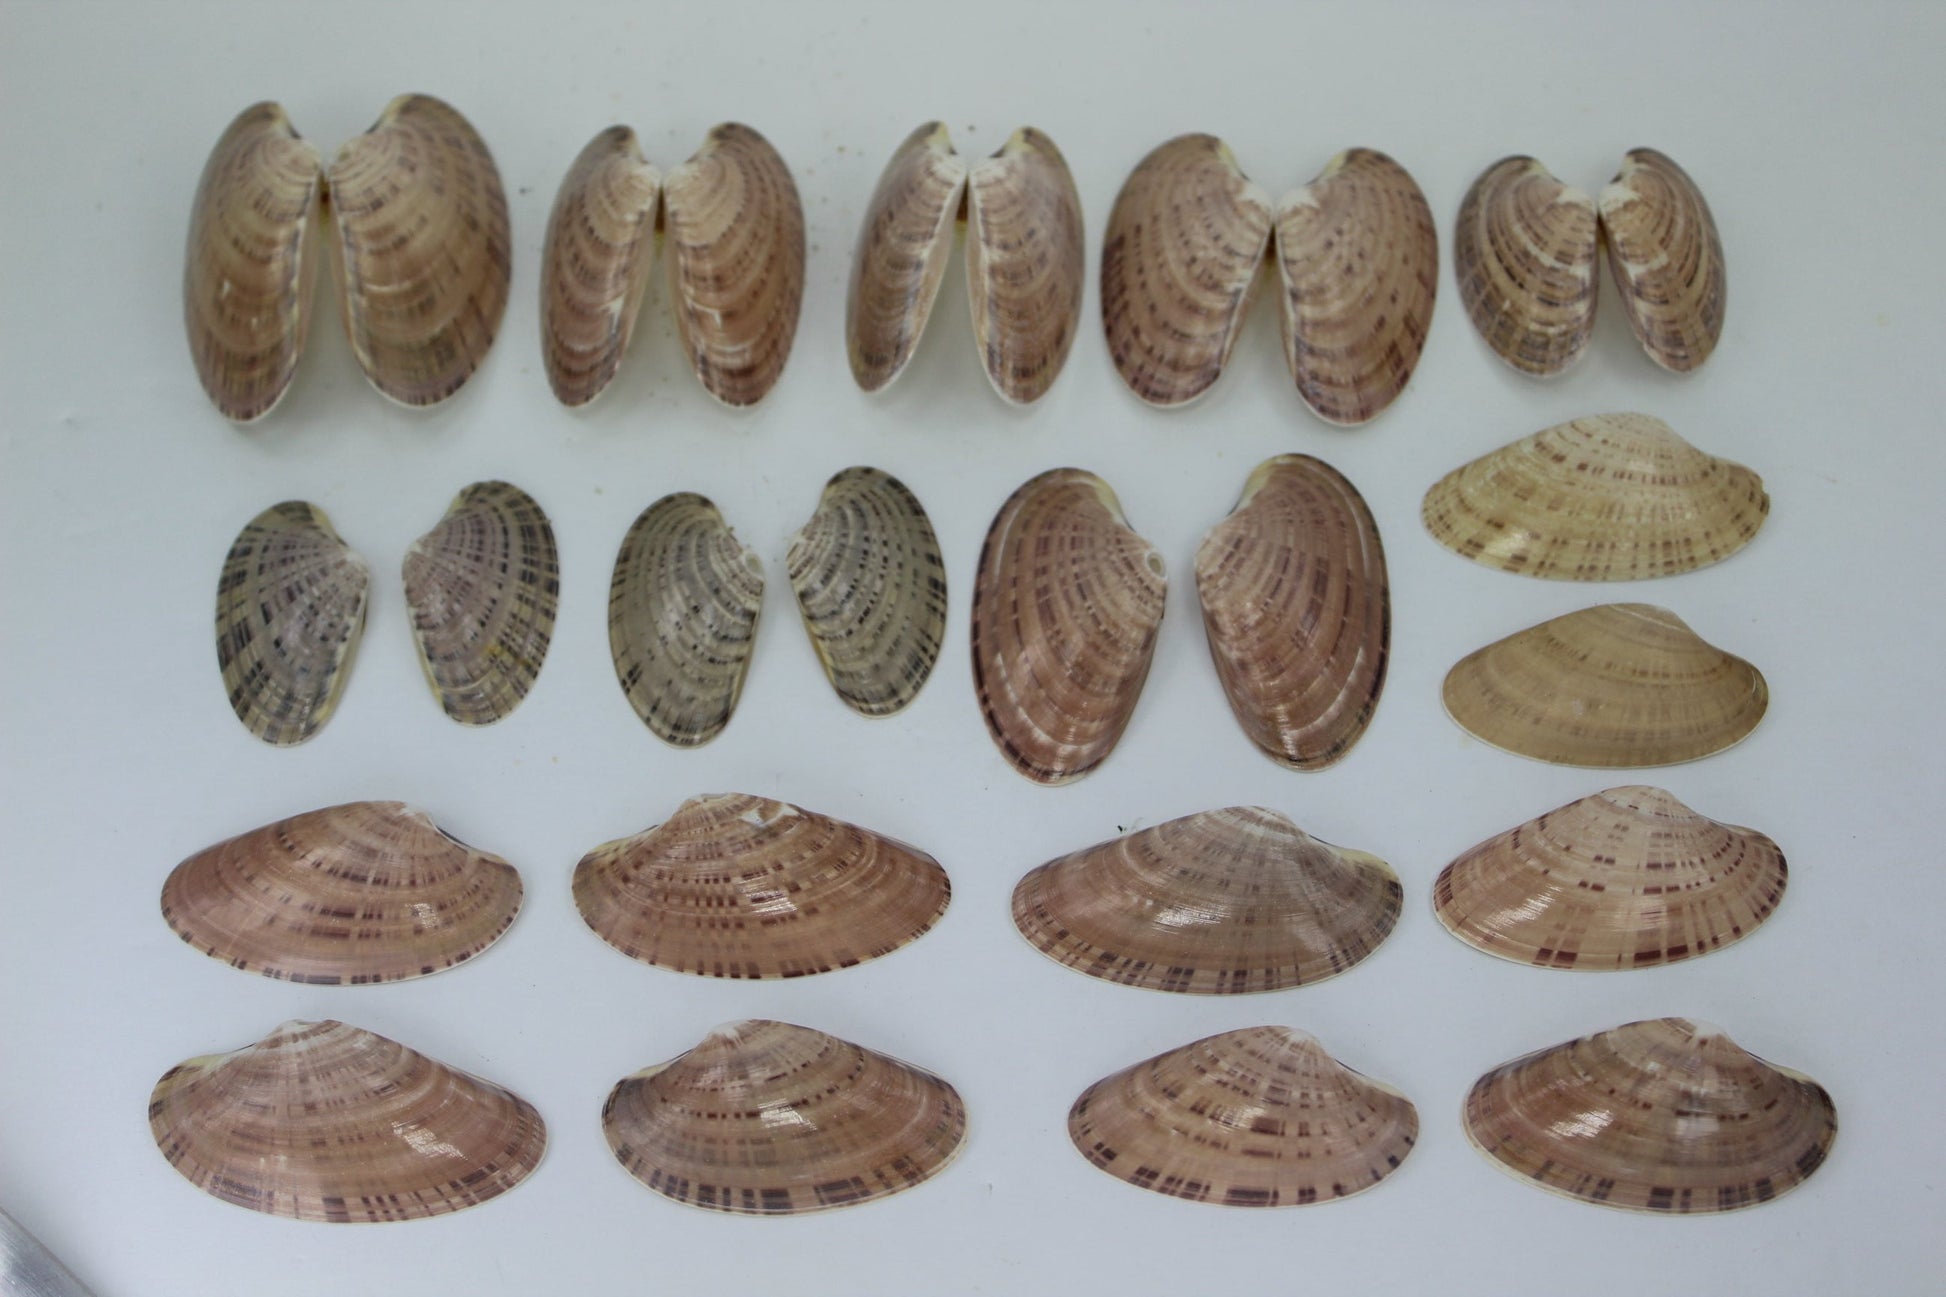 Florida Natural Shells Double Sunray Venus "Wings" Collection Crafts Jewelry